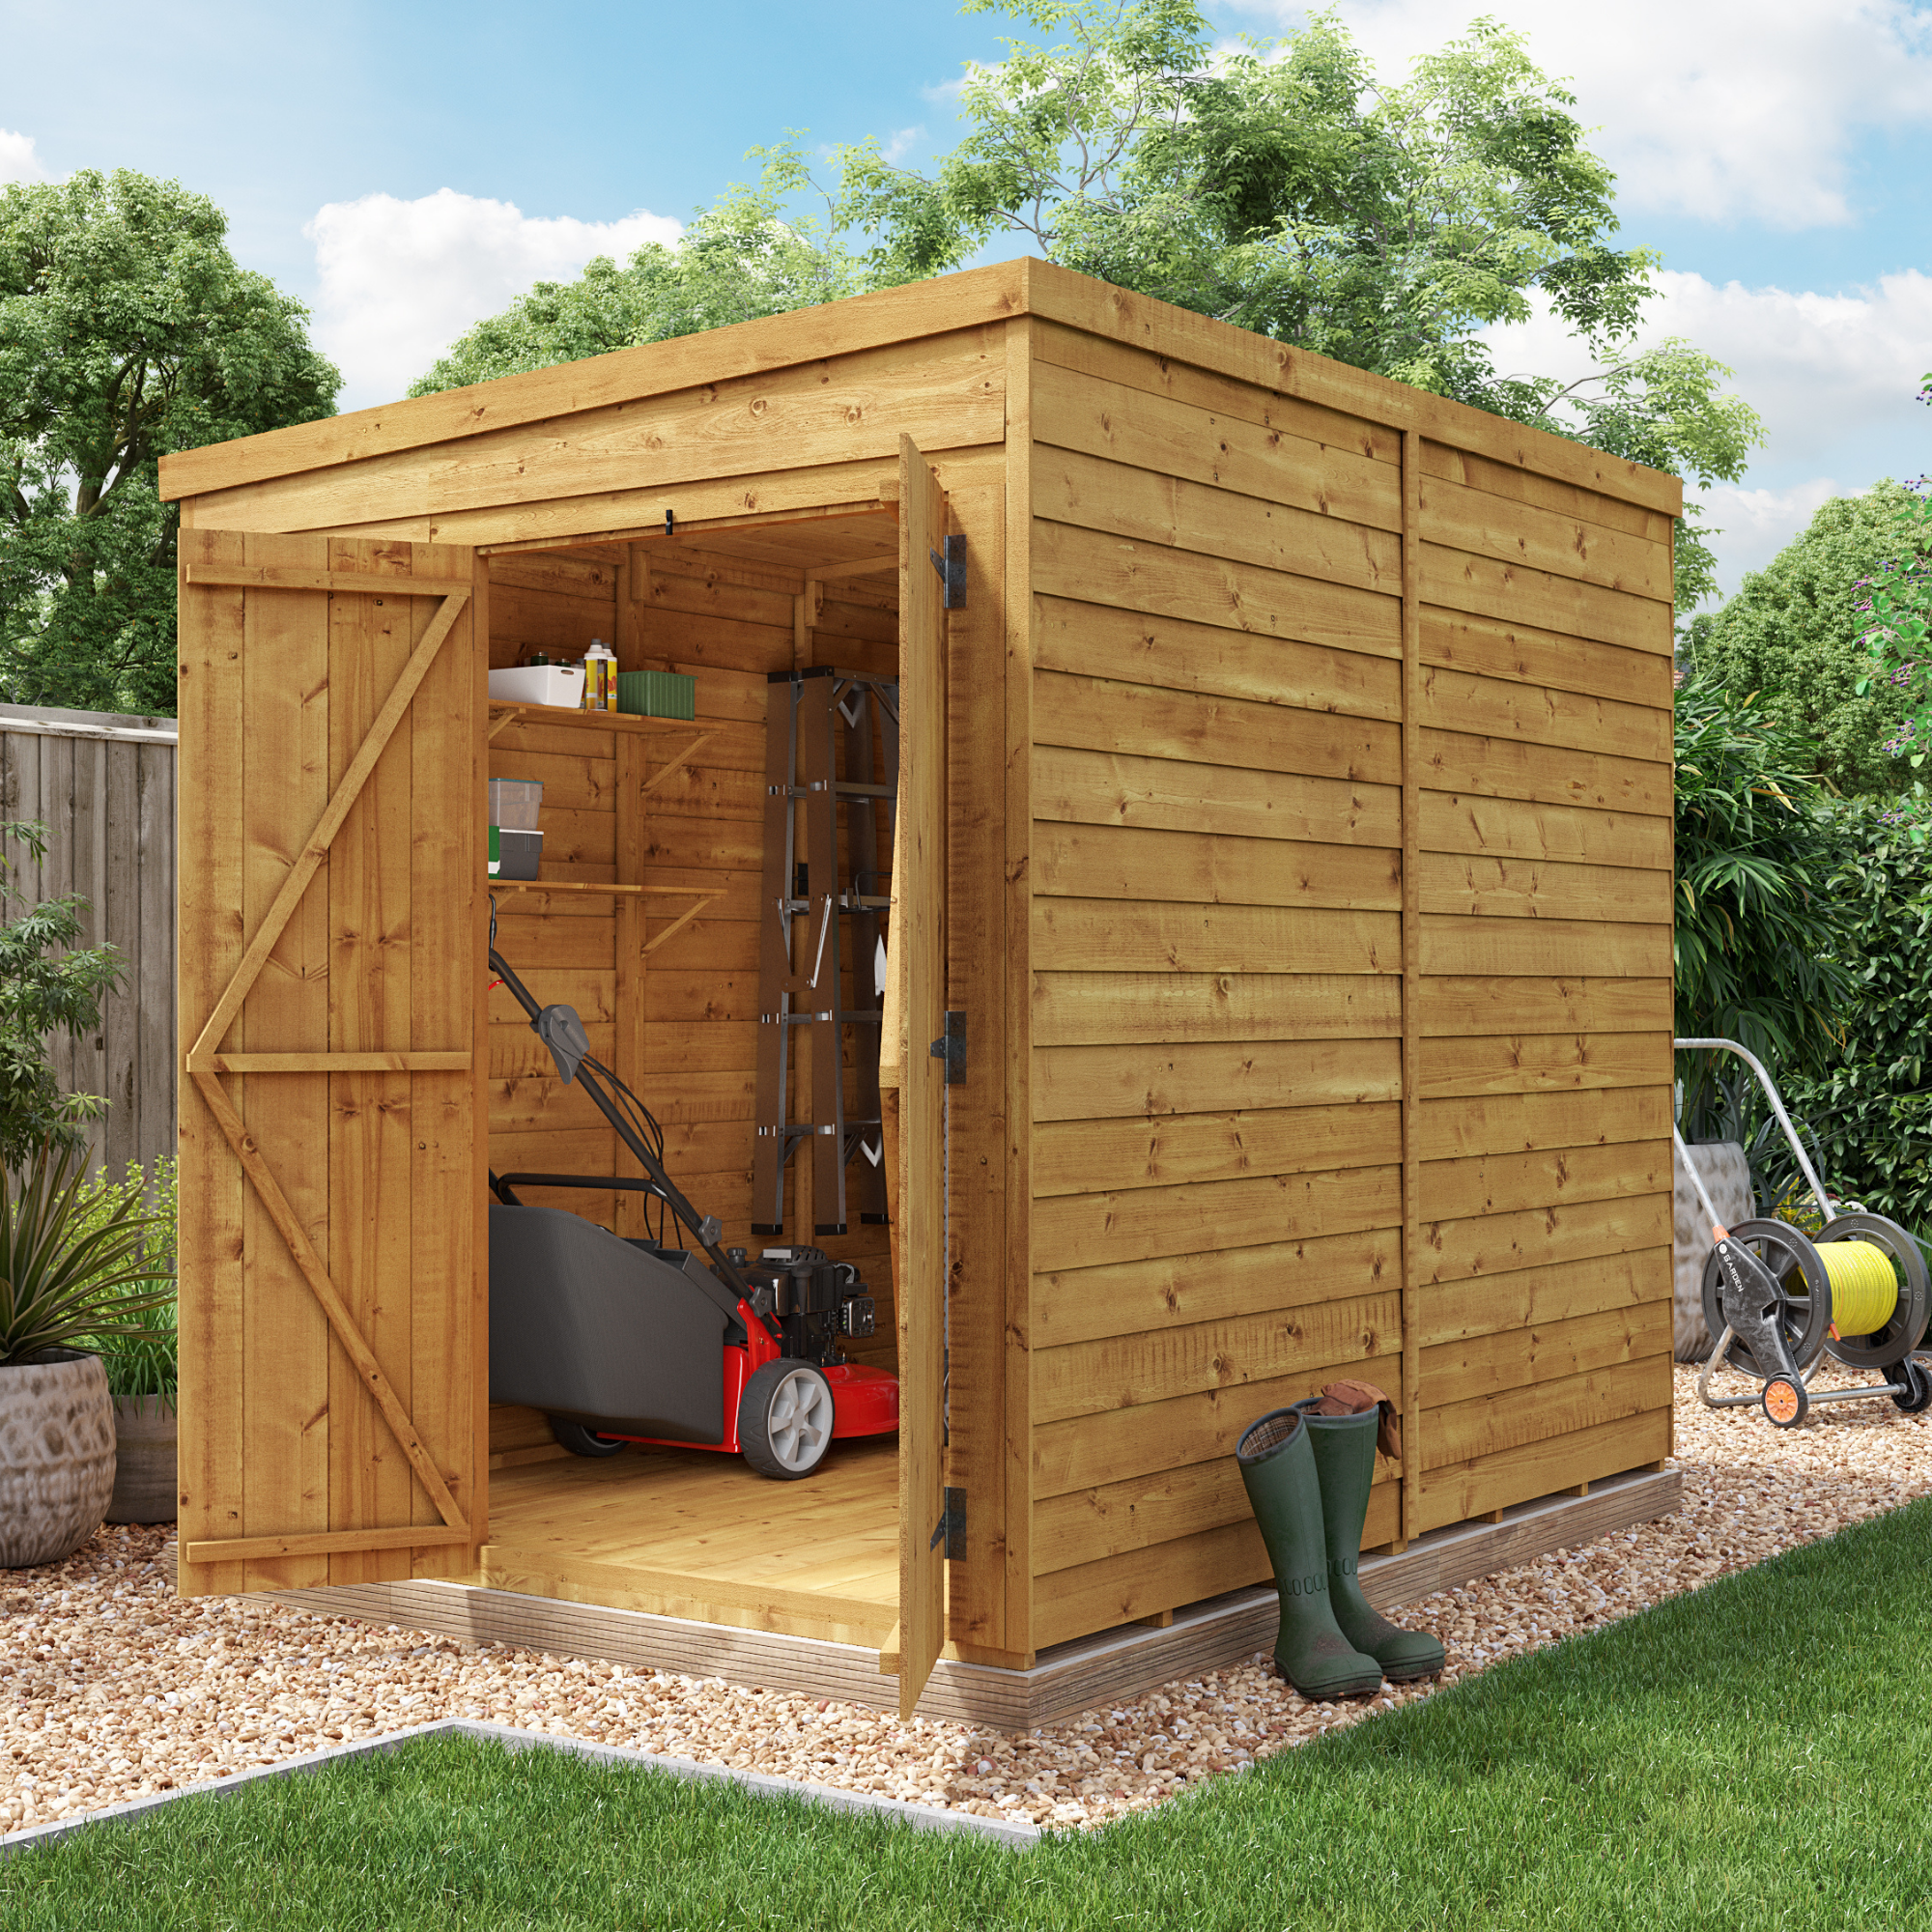 BillyOh Switch Overlap Pent Shed - 8x6 Windowless from BillyOh